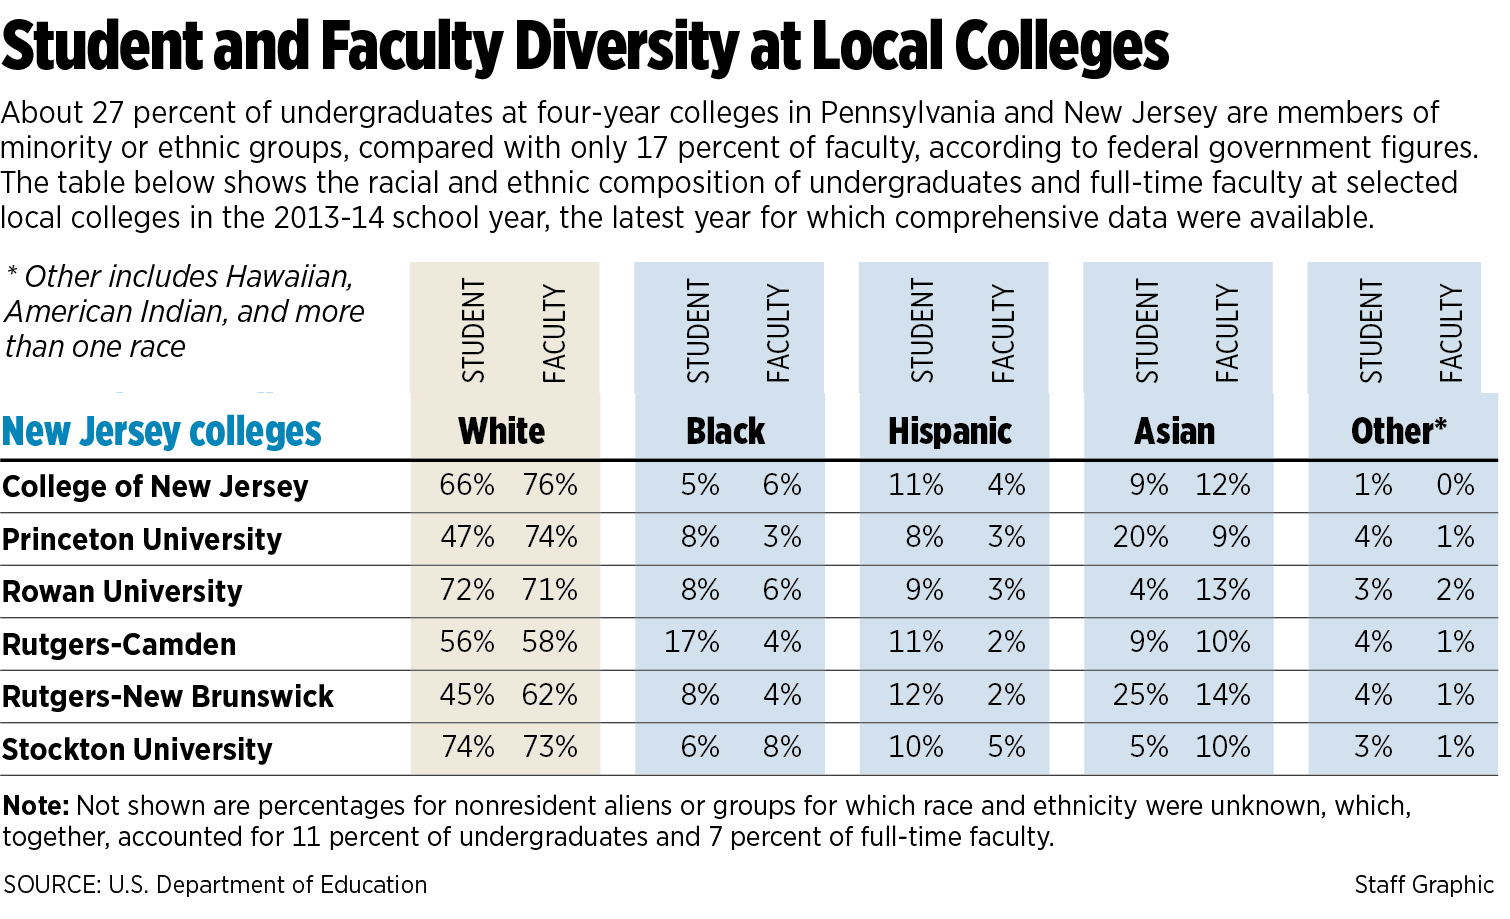 Student and faculty diversity